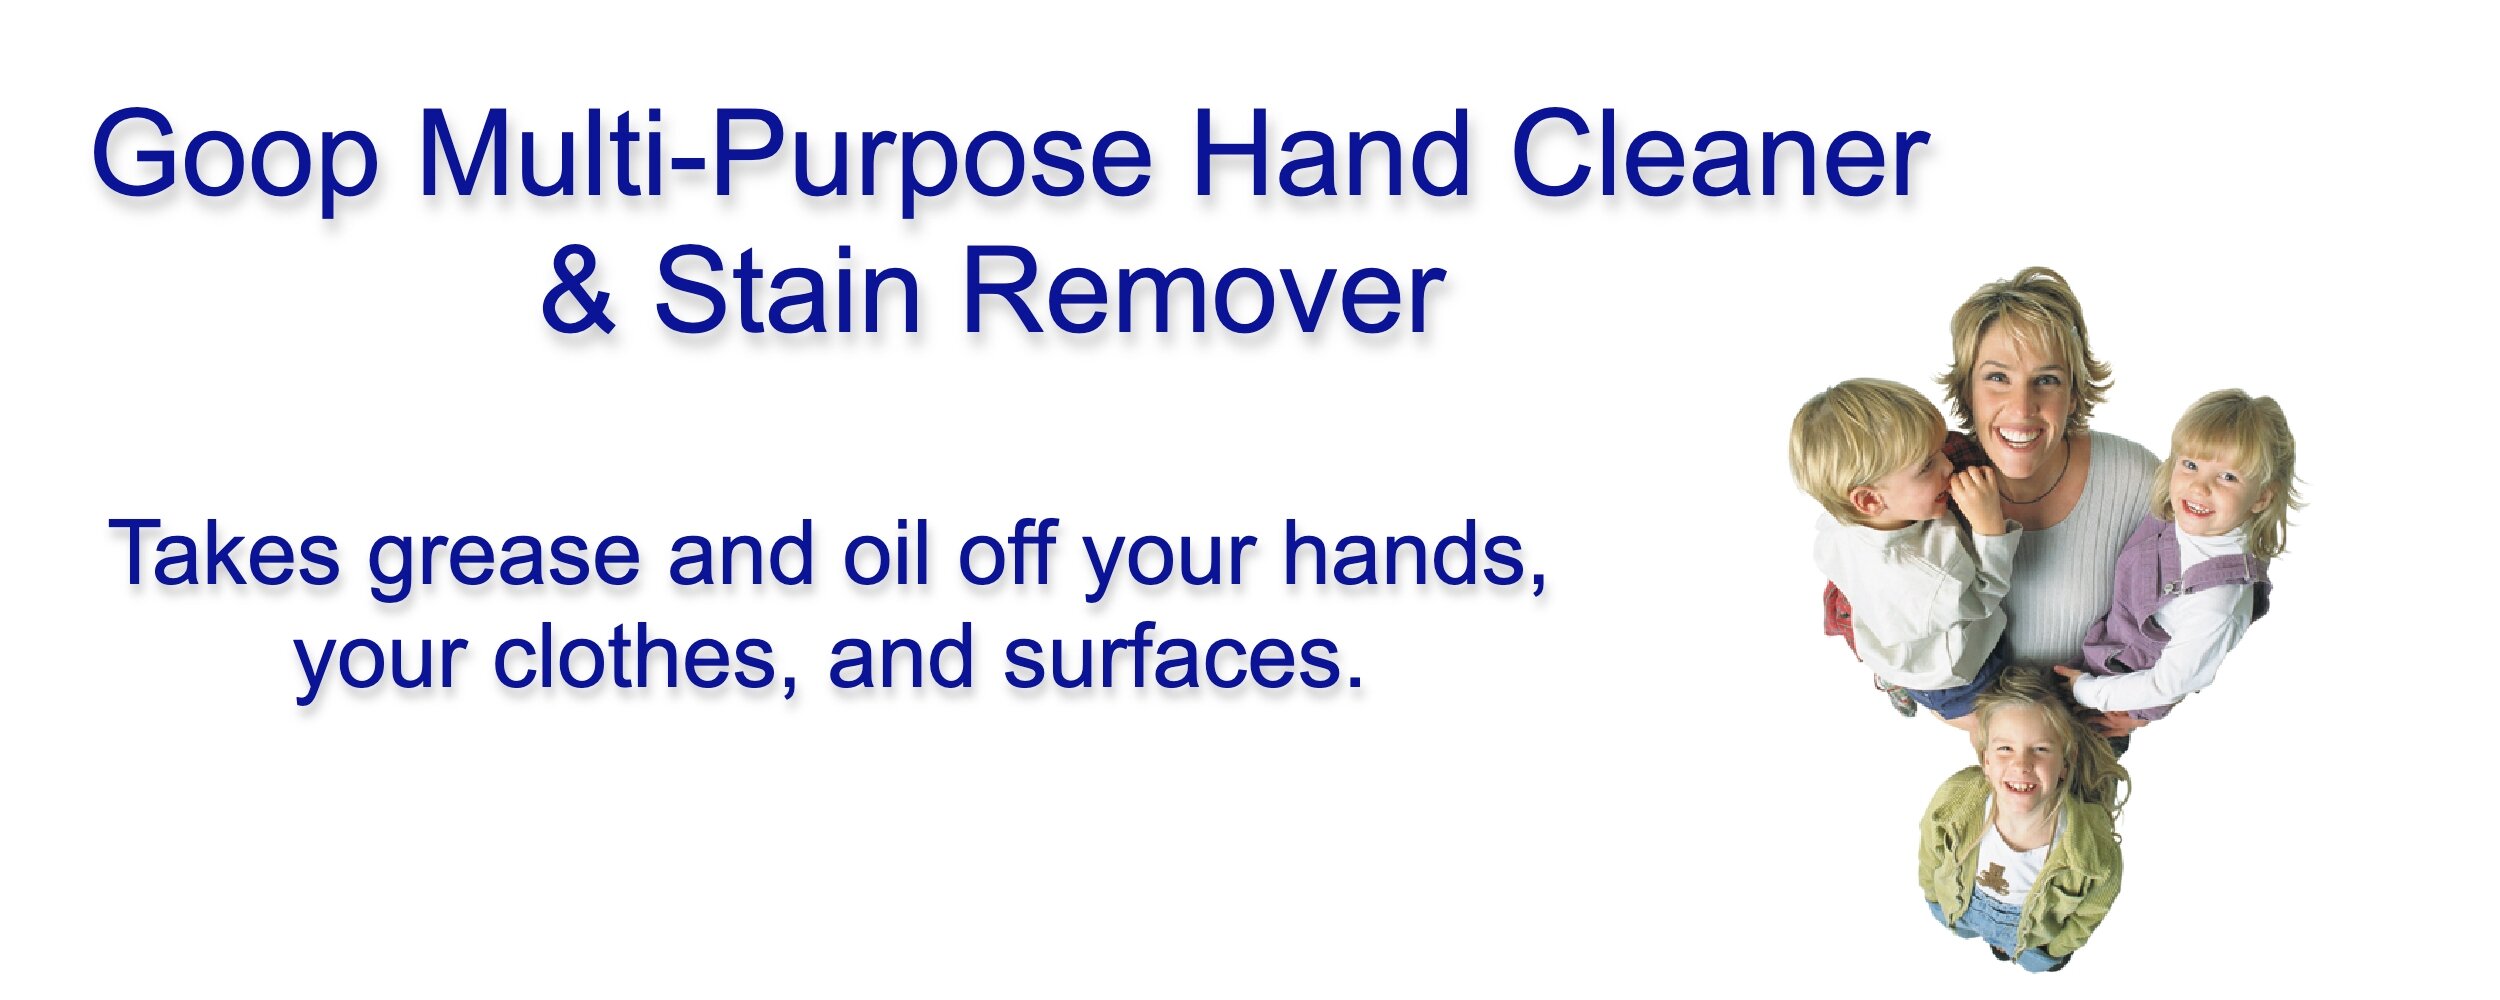 Goop Multi-Purpose Hand Cleaner &amp; Stain Remover Works